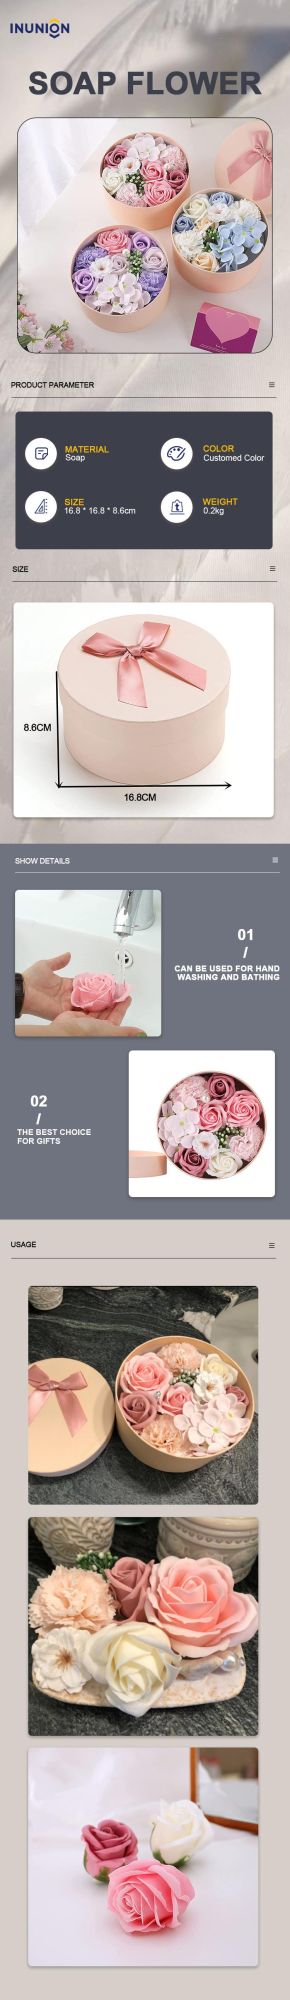 Soap Flower Gift Boxes Roses Flower for Valentine′ S Day, Mother′ S Day, Christmas